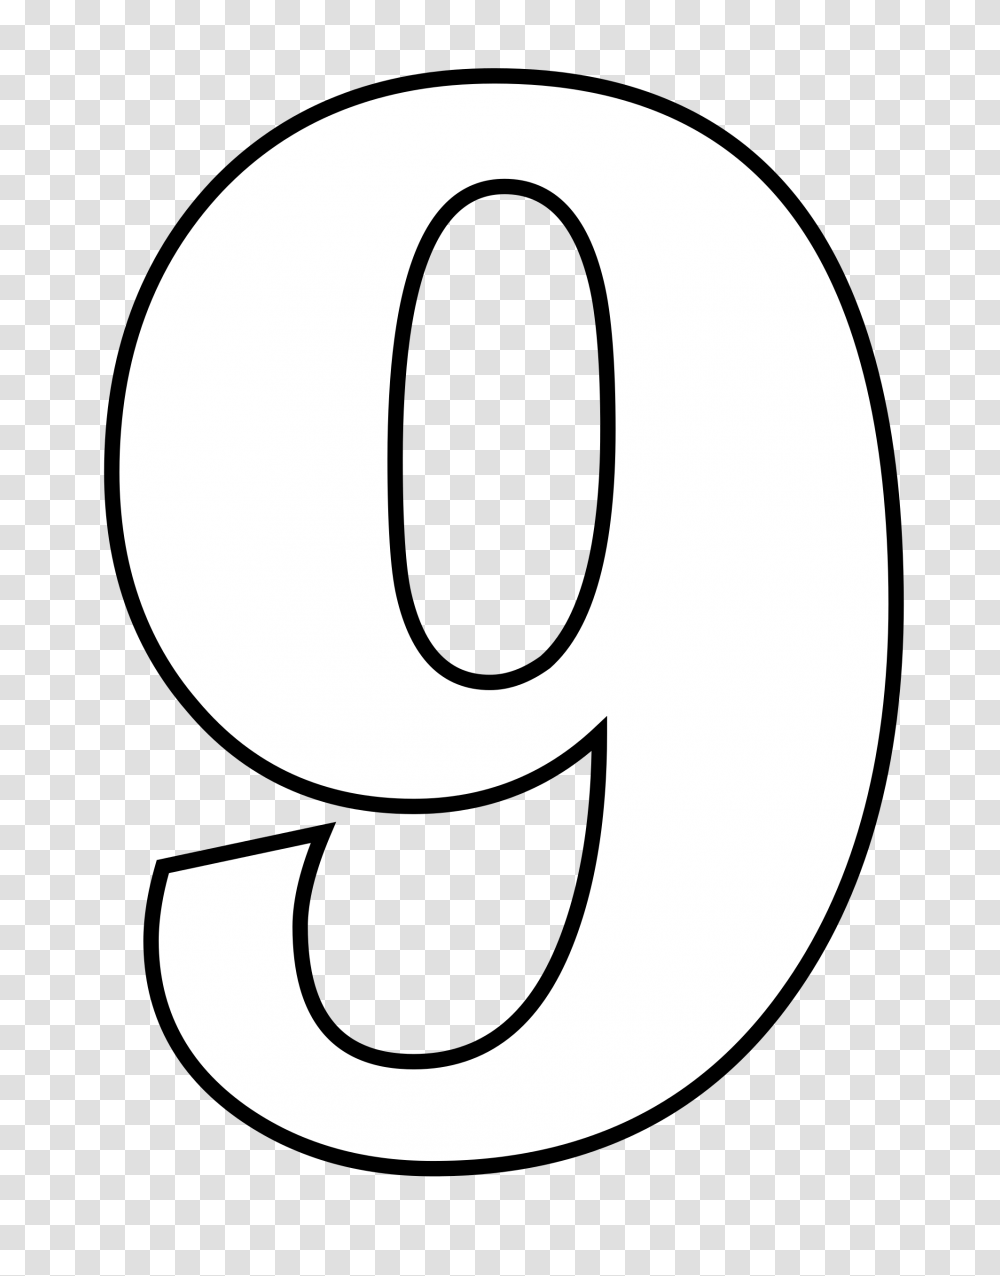 Classic Alphabet Numbers 9 At Coloring Pages For Kids Boys Dotcom.svg Transparent Png